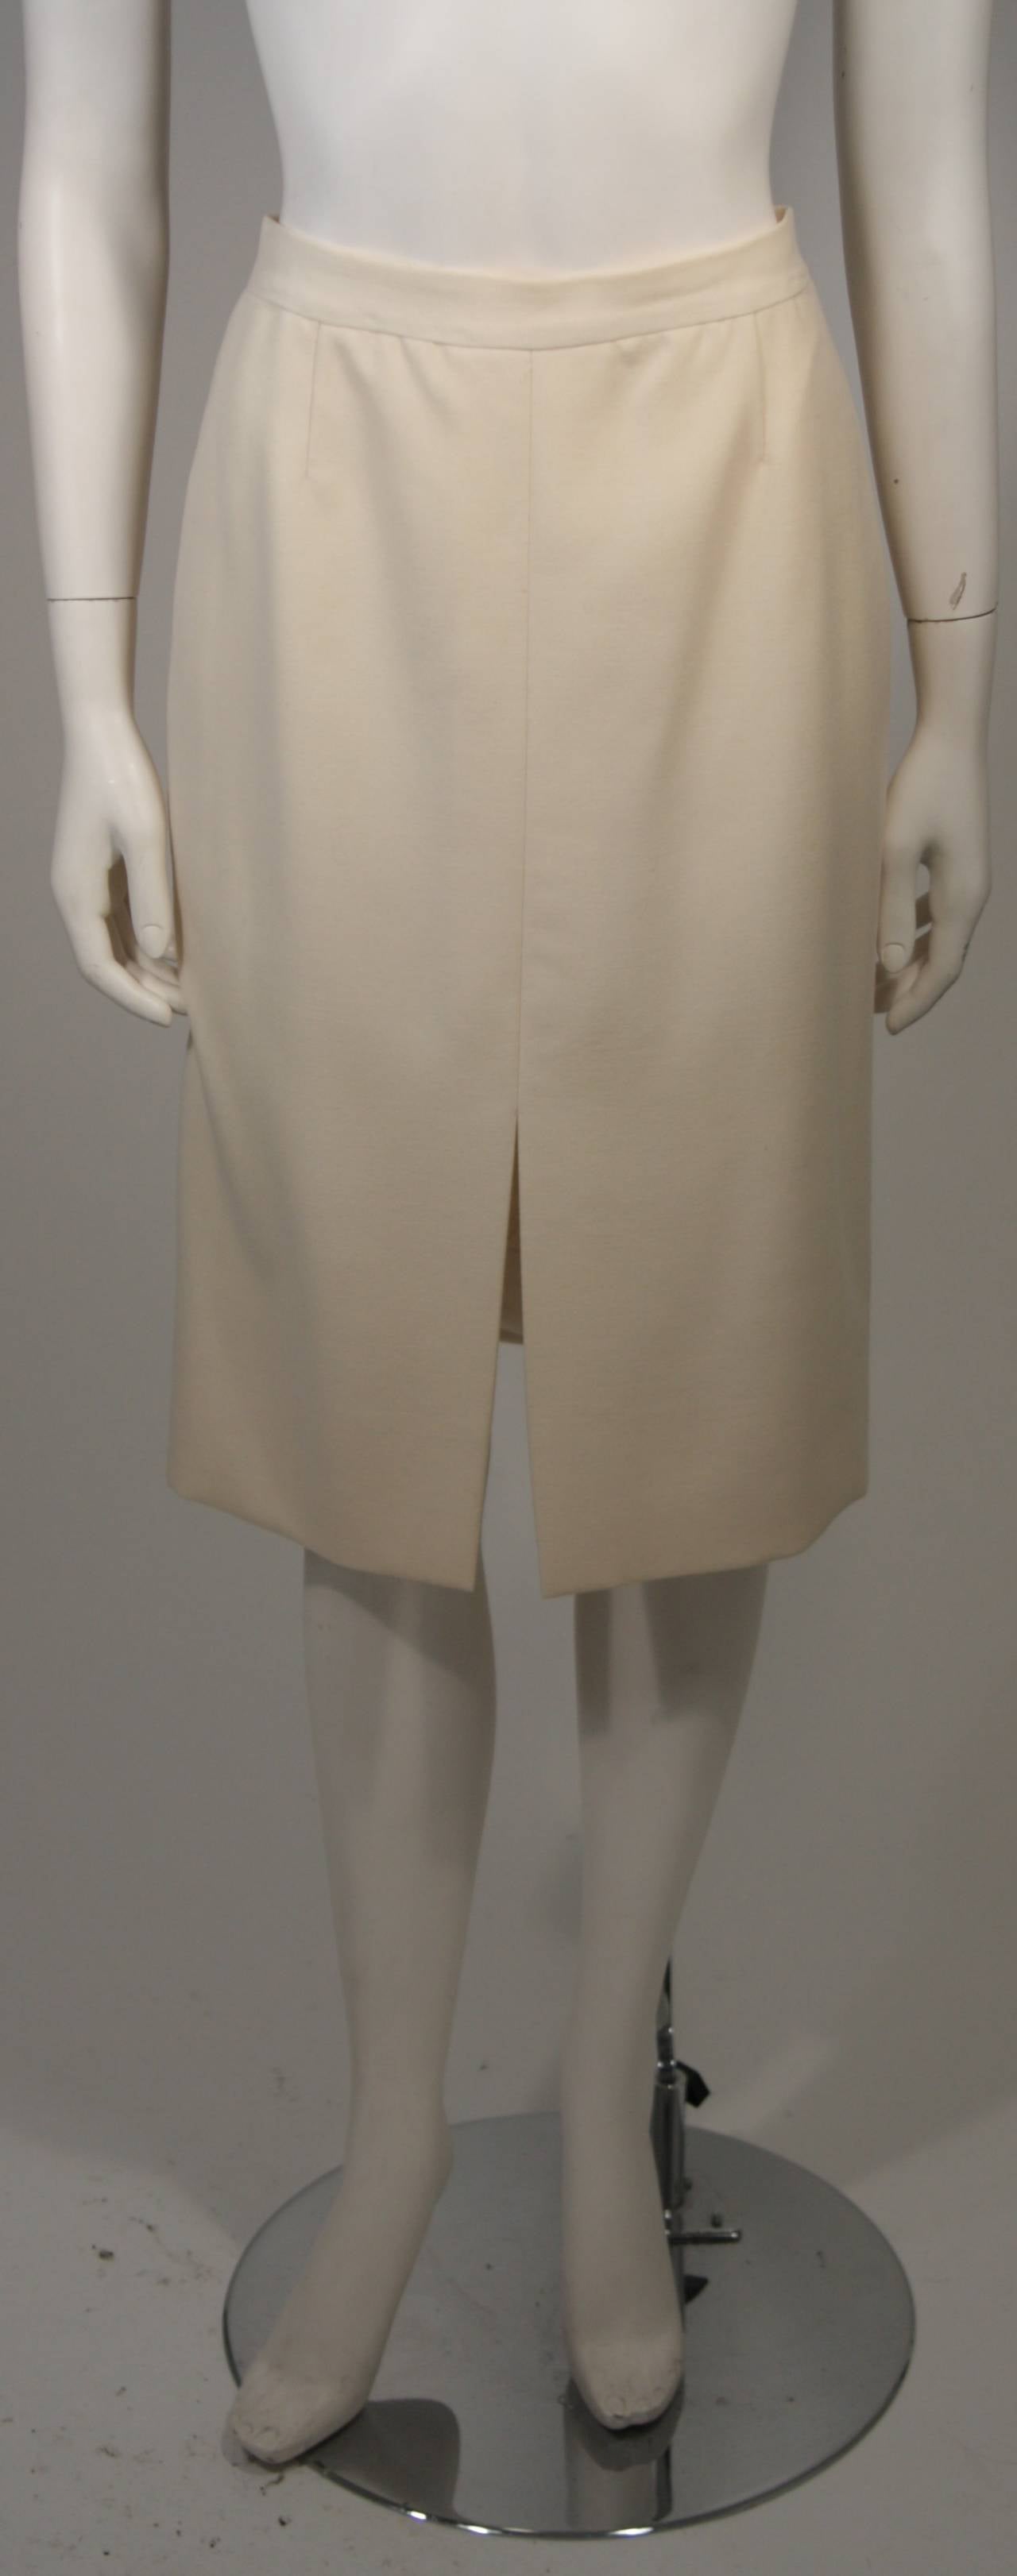 Nolan Miller Couture Embellished Ivory Wool Skirt Suit Size Small 3